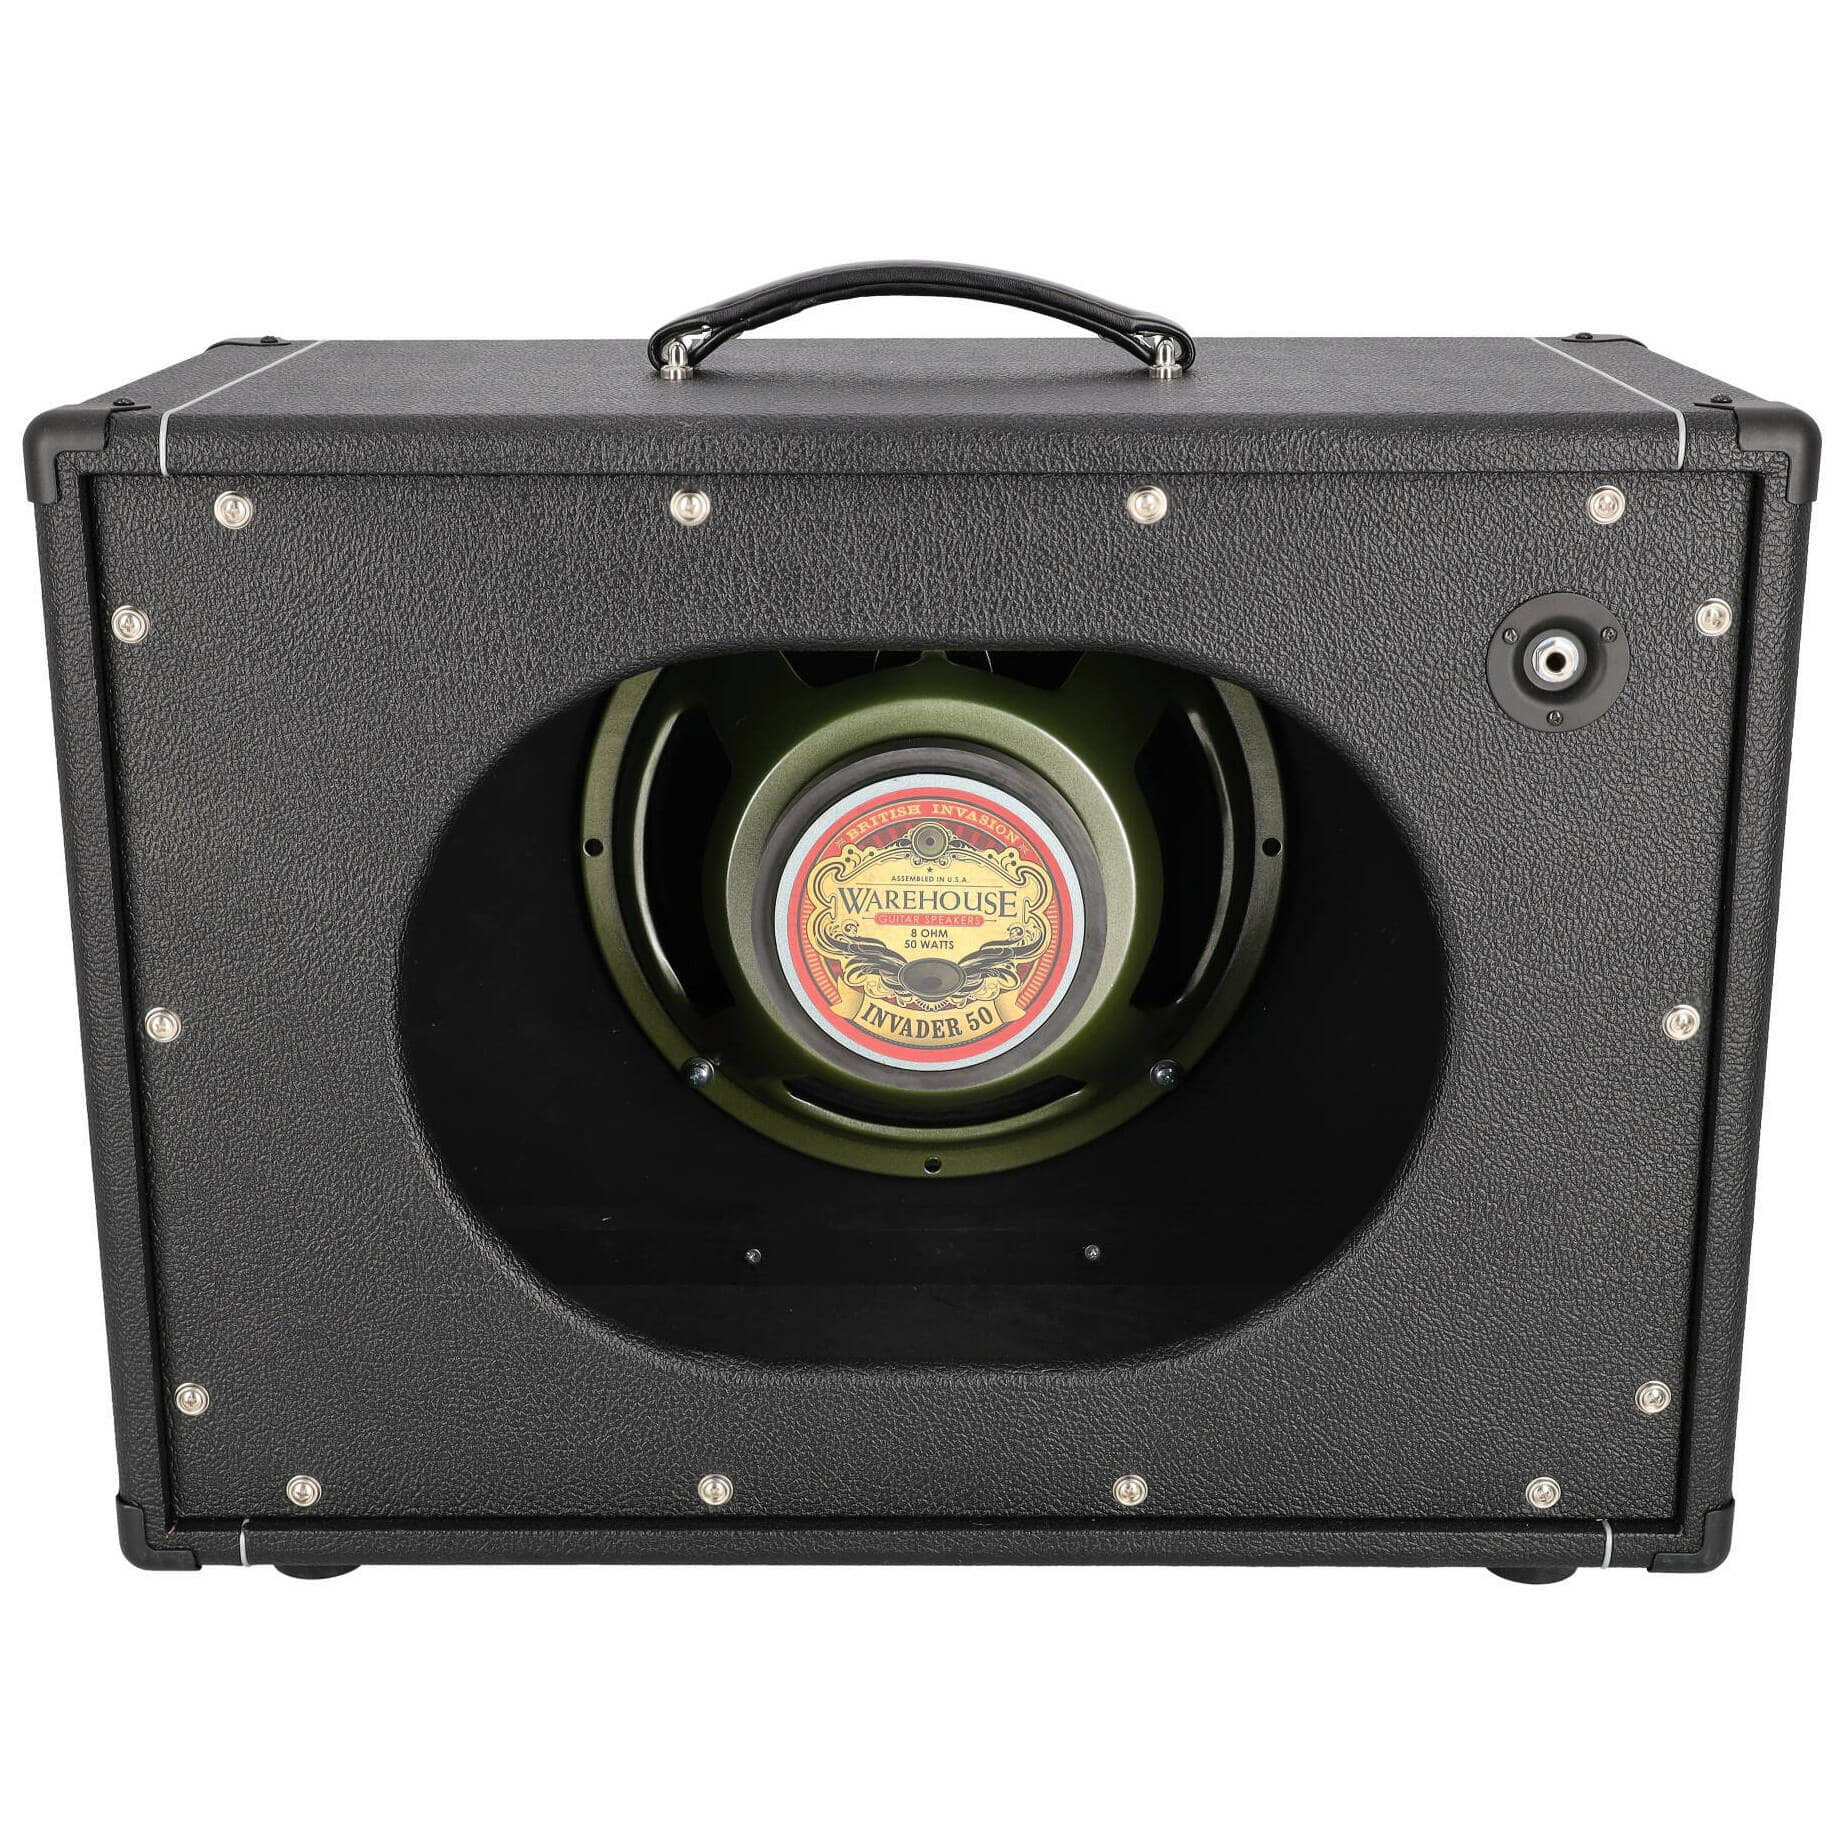 Hook Amplification 1x12 Cabinet WGS Oval Black 3